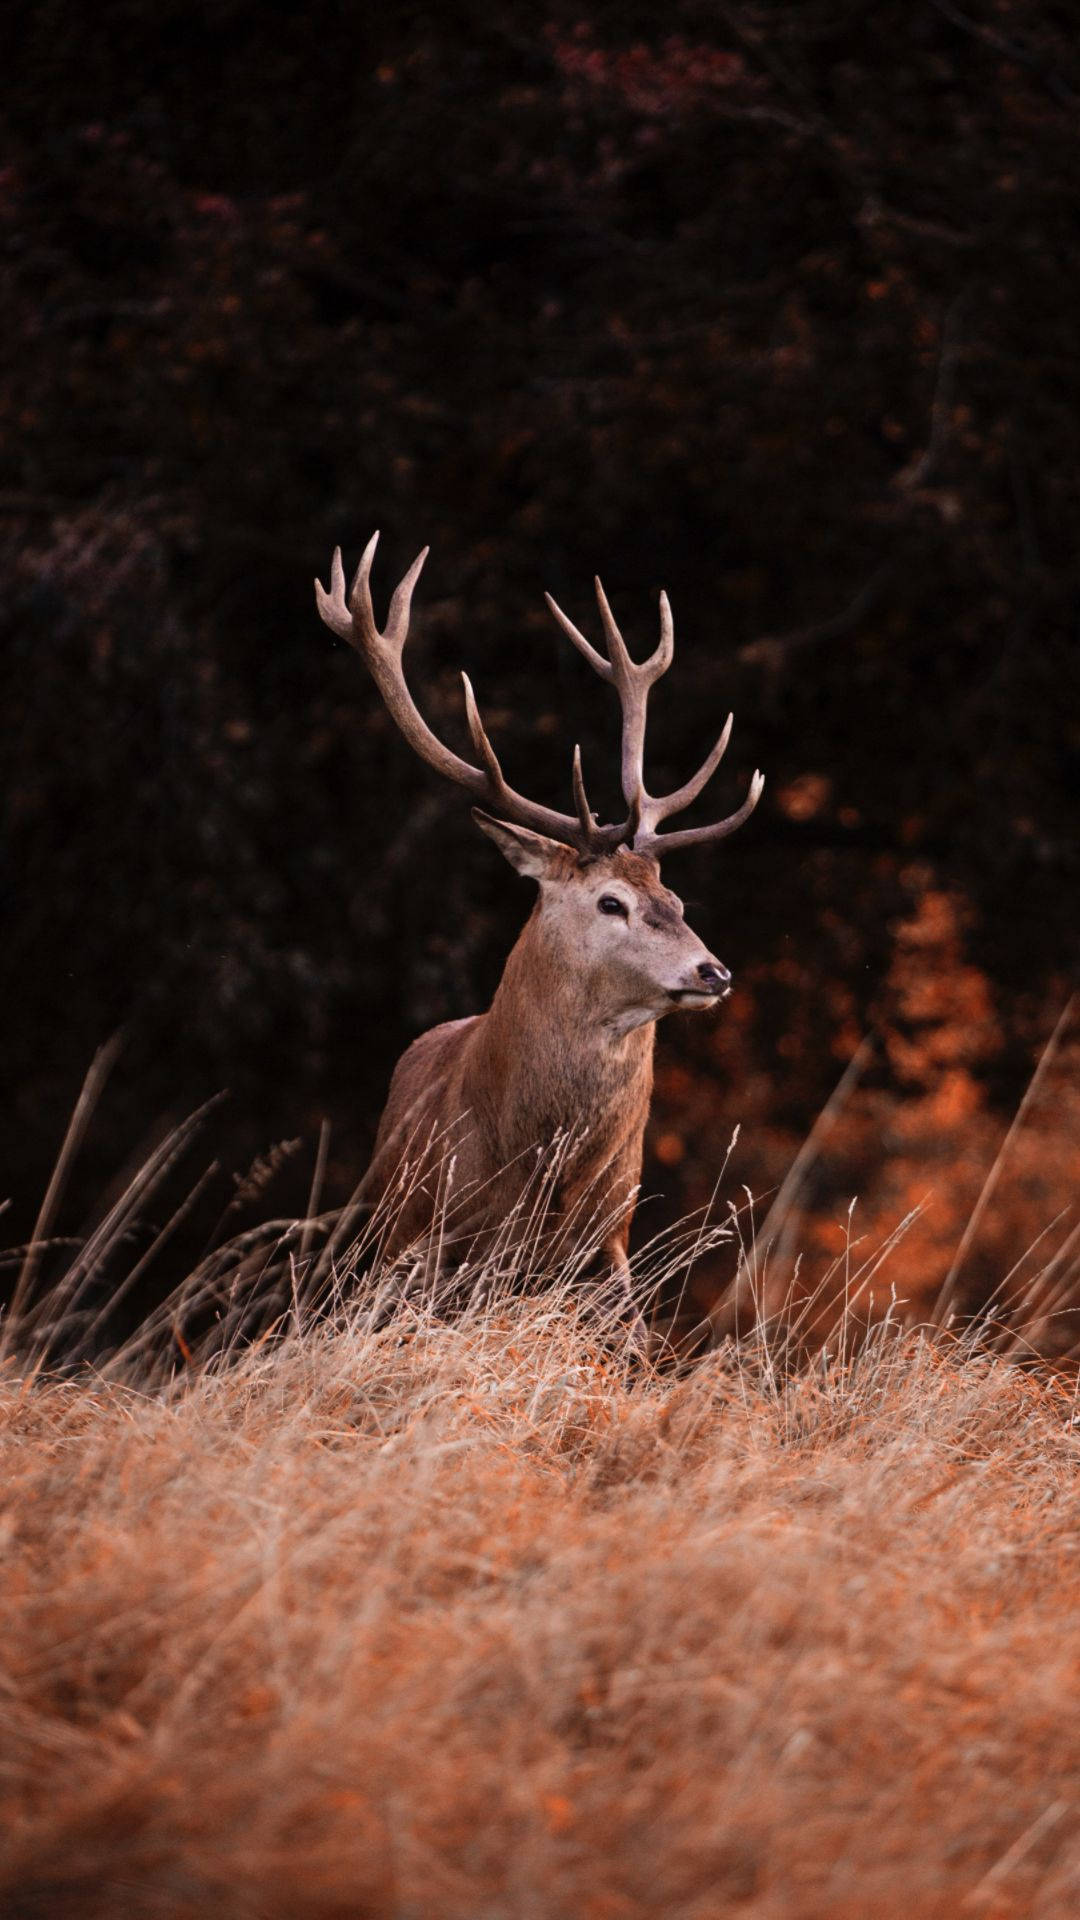 Get closer to Nature with the Deer Iphone Wallpaper